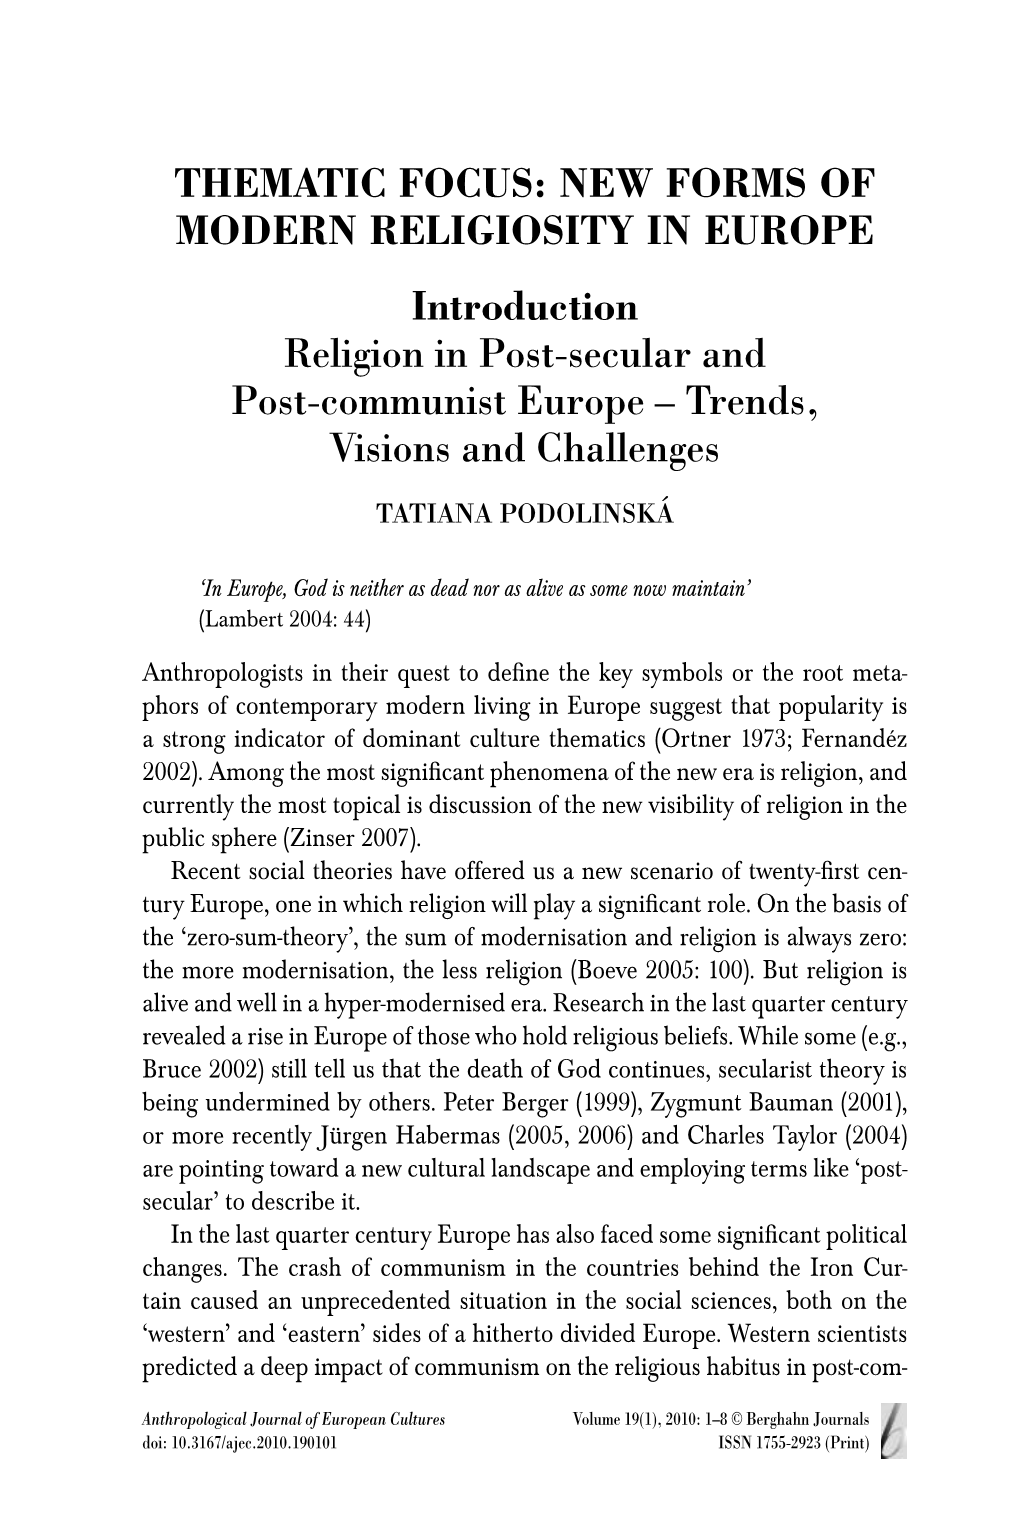 THEMATIC FOCUS: NEW FORMS of MODERN RELIGIOSITY in EUROPE Introduction Religion in Post-Secular and Post-Communist Europe – Trends, Visions and Challenges